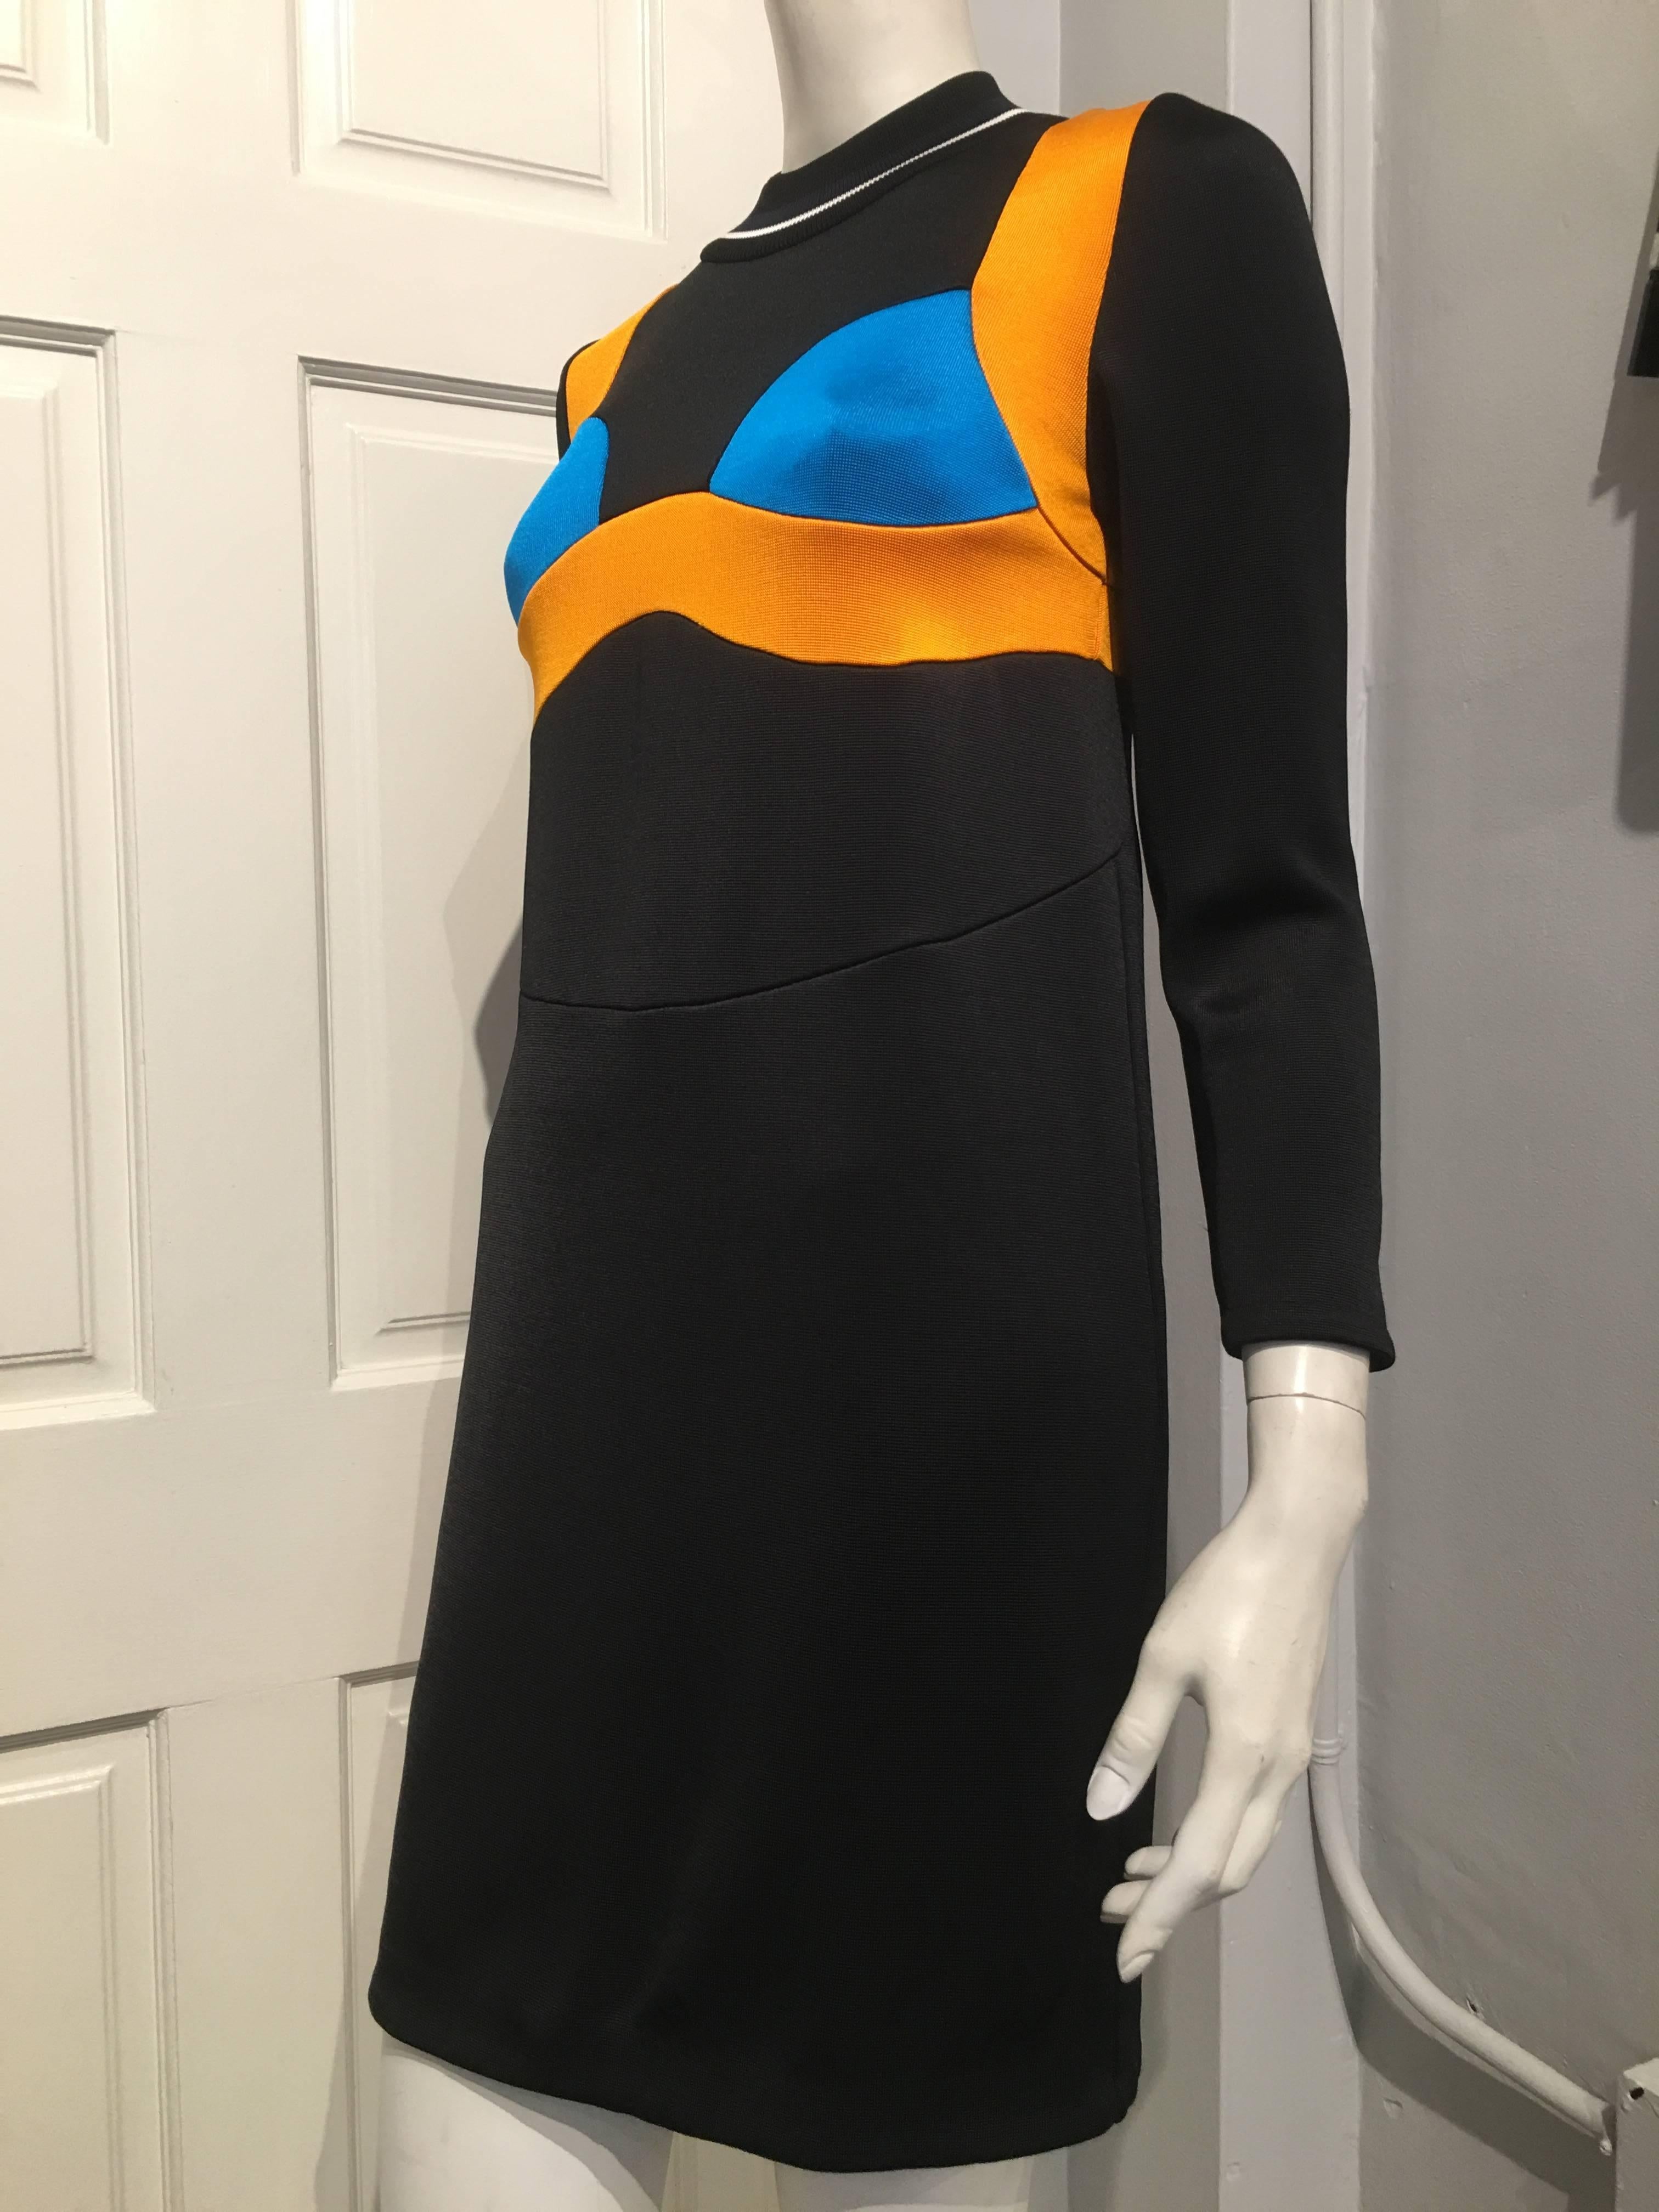 This Prada dress is part of the 2014 spring/summer ready-to-wear collection. It features a mock bra in turquoise and goldenrod, and a white and dark navy band on the ribbed collar. The top and skirt are attached by a seam. The sleeves are 22 inches